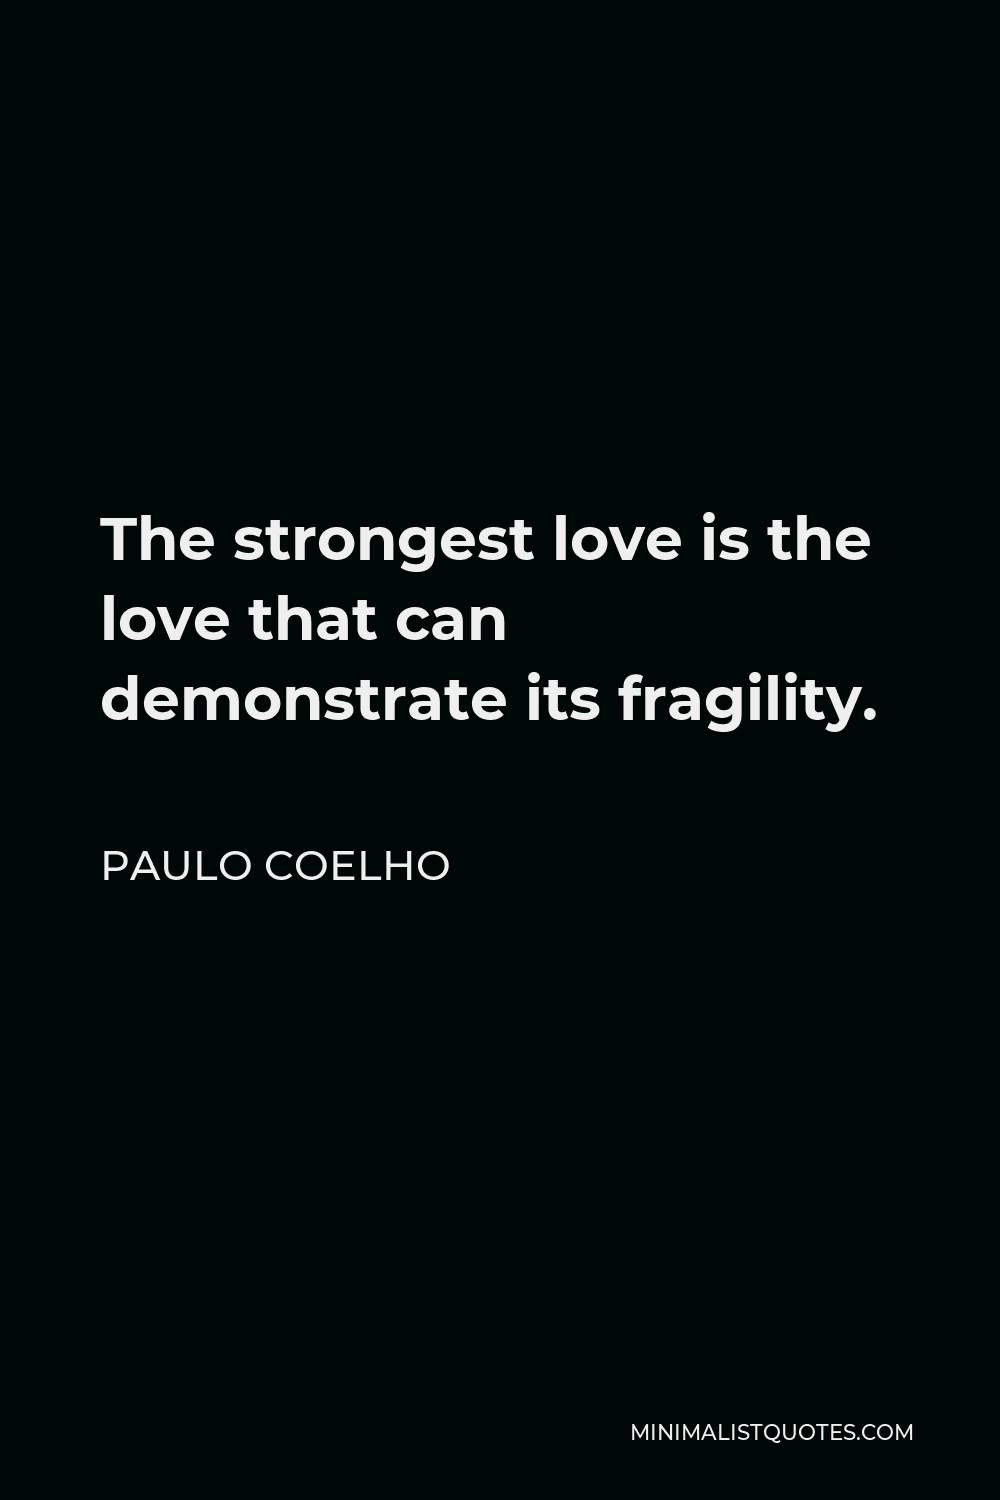 Paulo Coelho Quote - The strongest love is the love that can demonstrate its fragility.